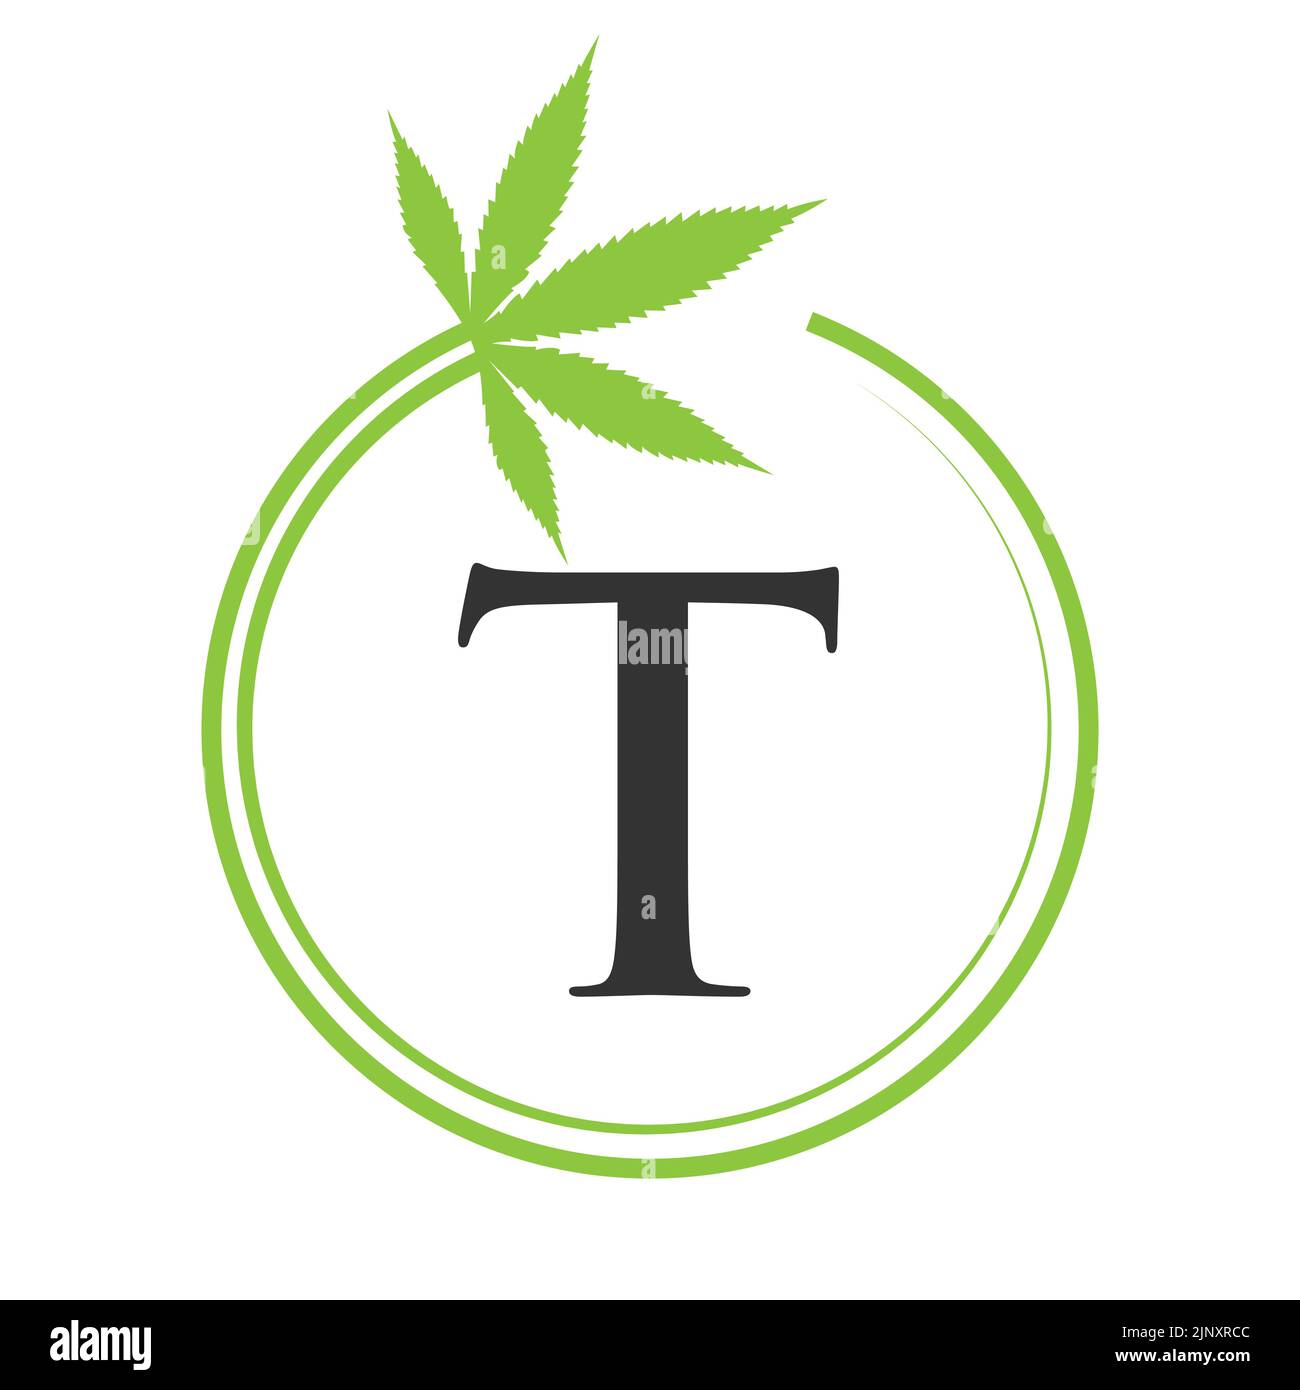 Cannabis Marijuana Logo on Letter T Concept For Health and Medical Therapy. Marijuana, Cannabis Sign Template Stock Vector